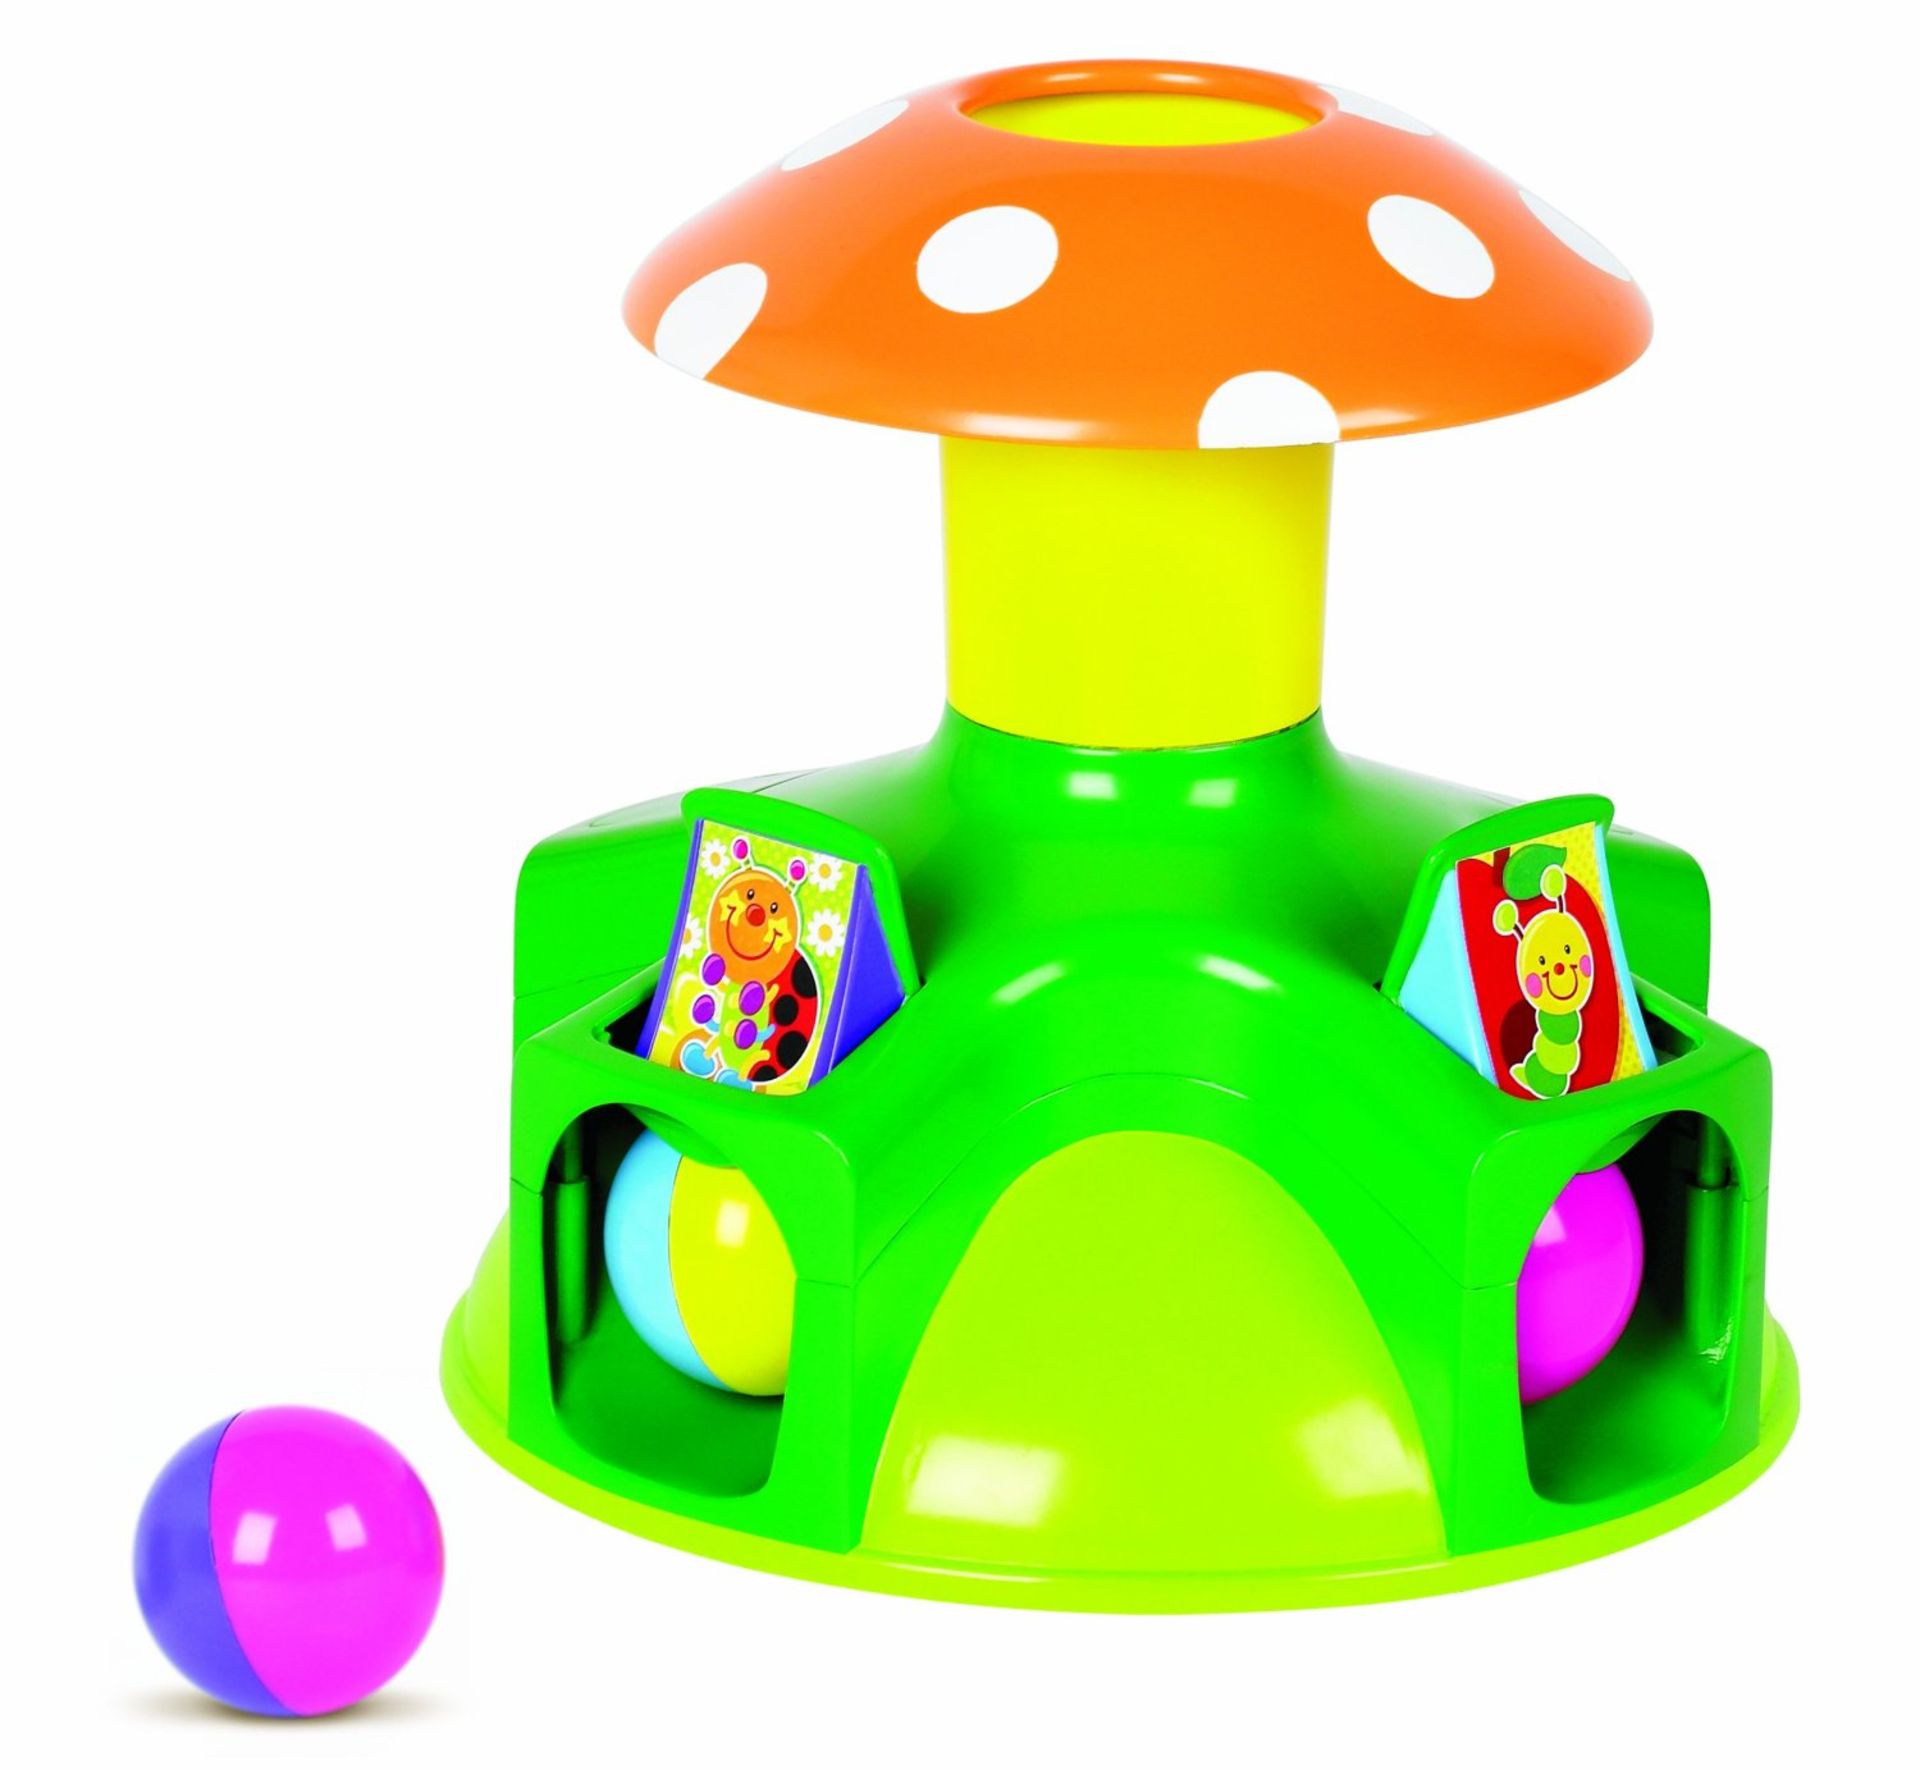 V Grade A Tomy Play To Learn Post'n'Pop 6 Month+ RRP £19.99 X 2 Bid price to be multiplied by Two